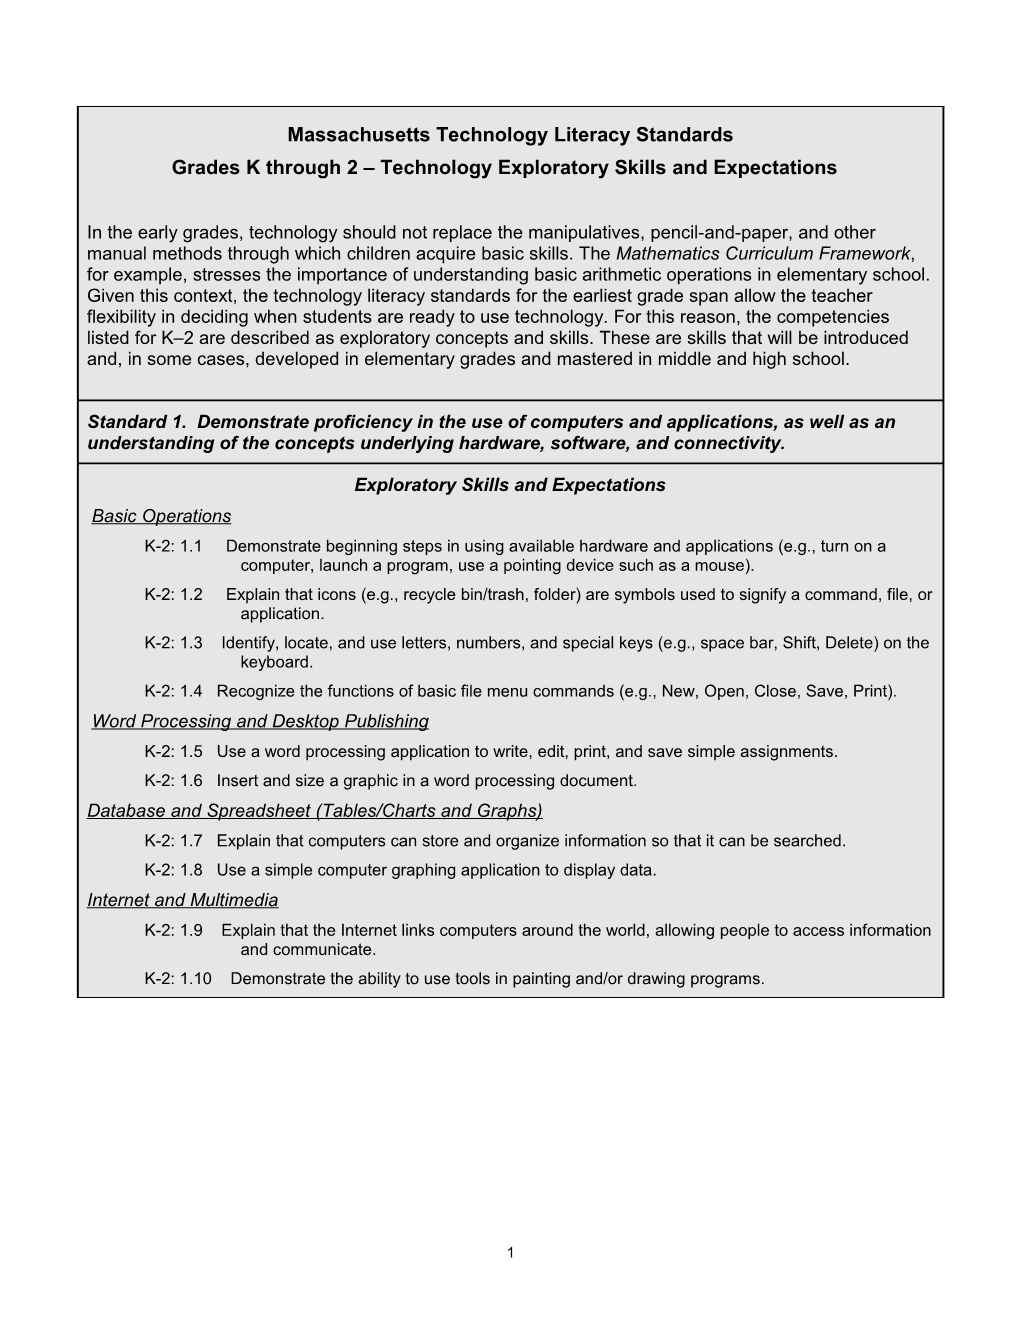 Massachusetts Technology Standards and Expectations